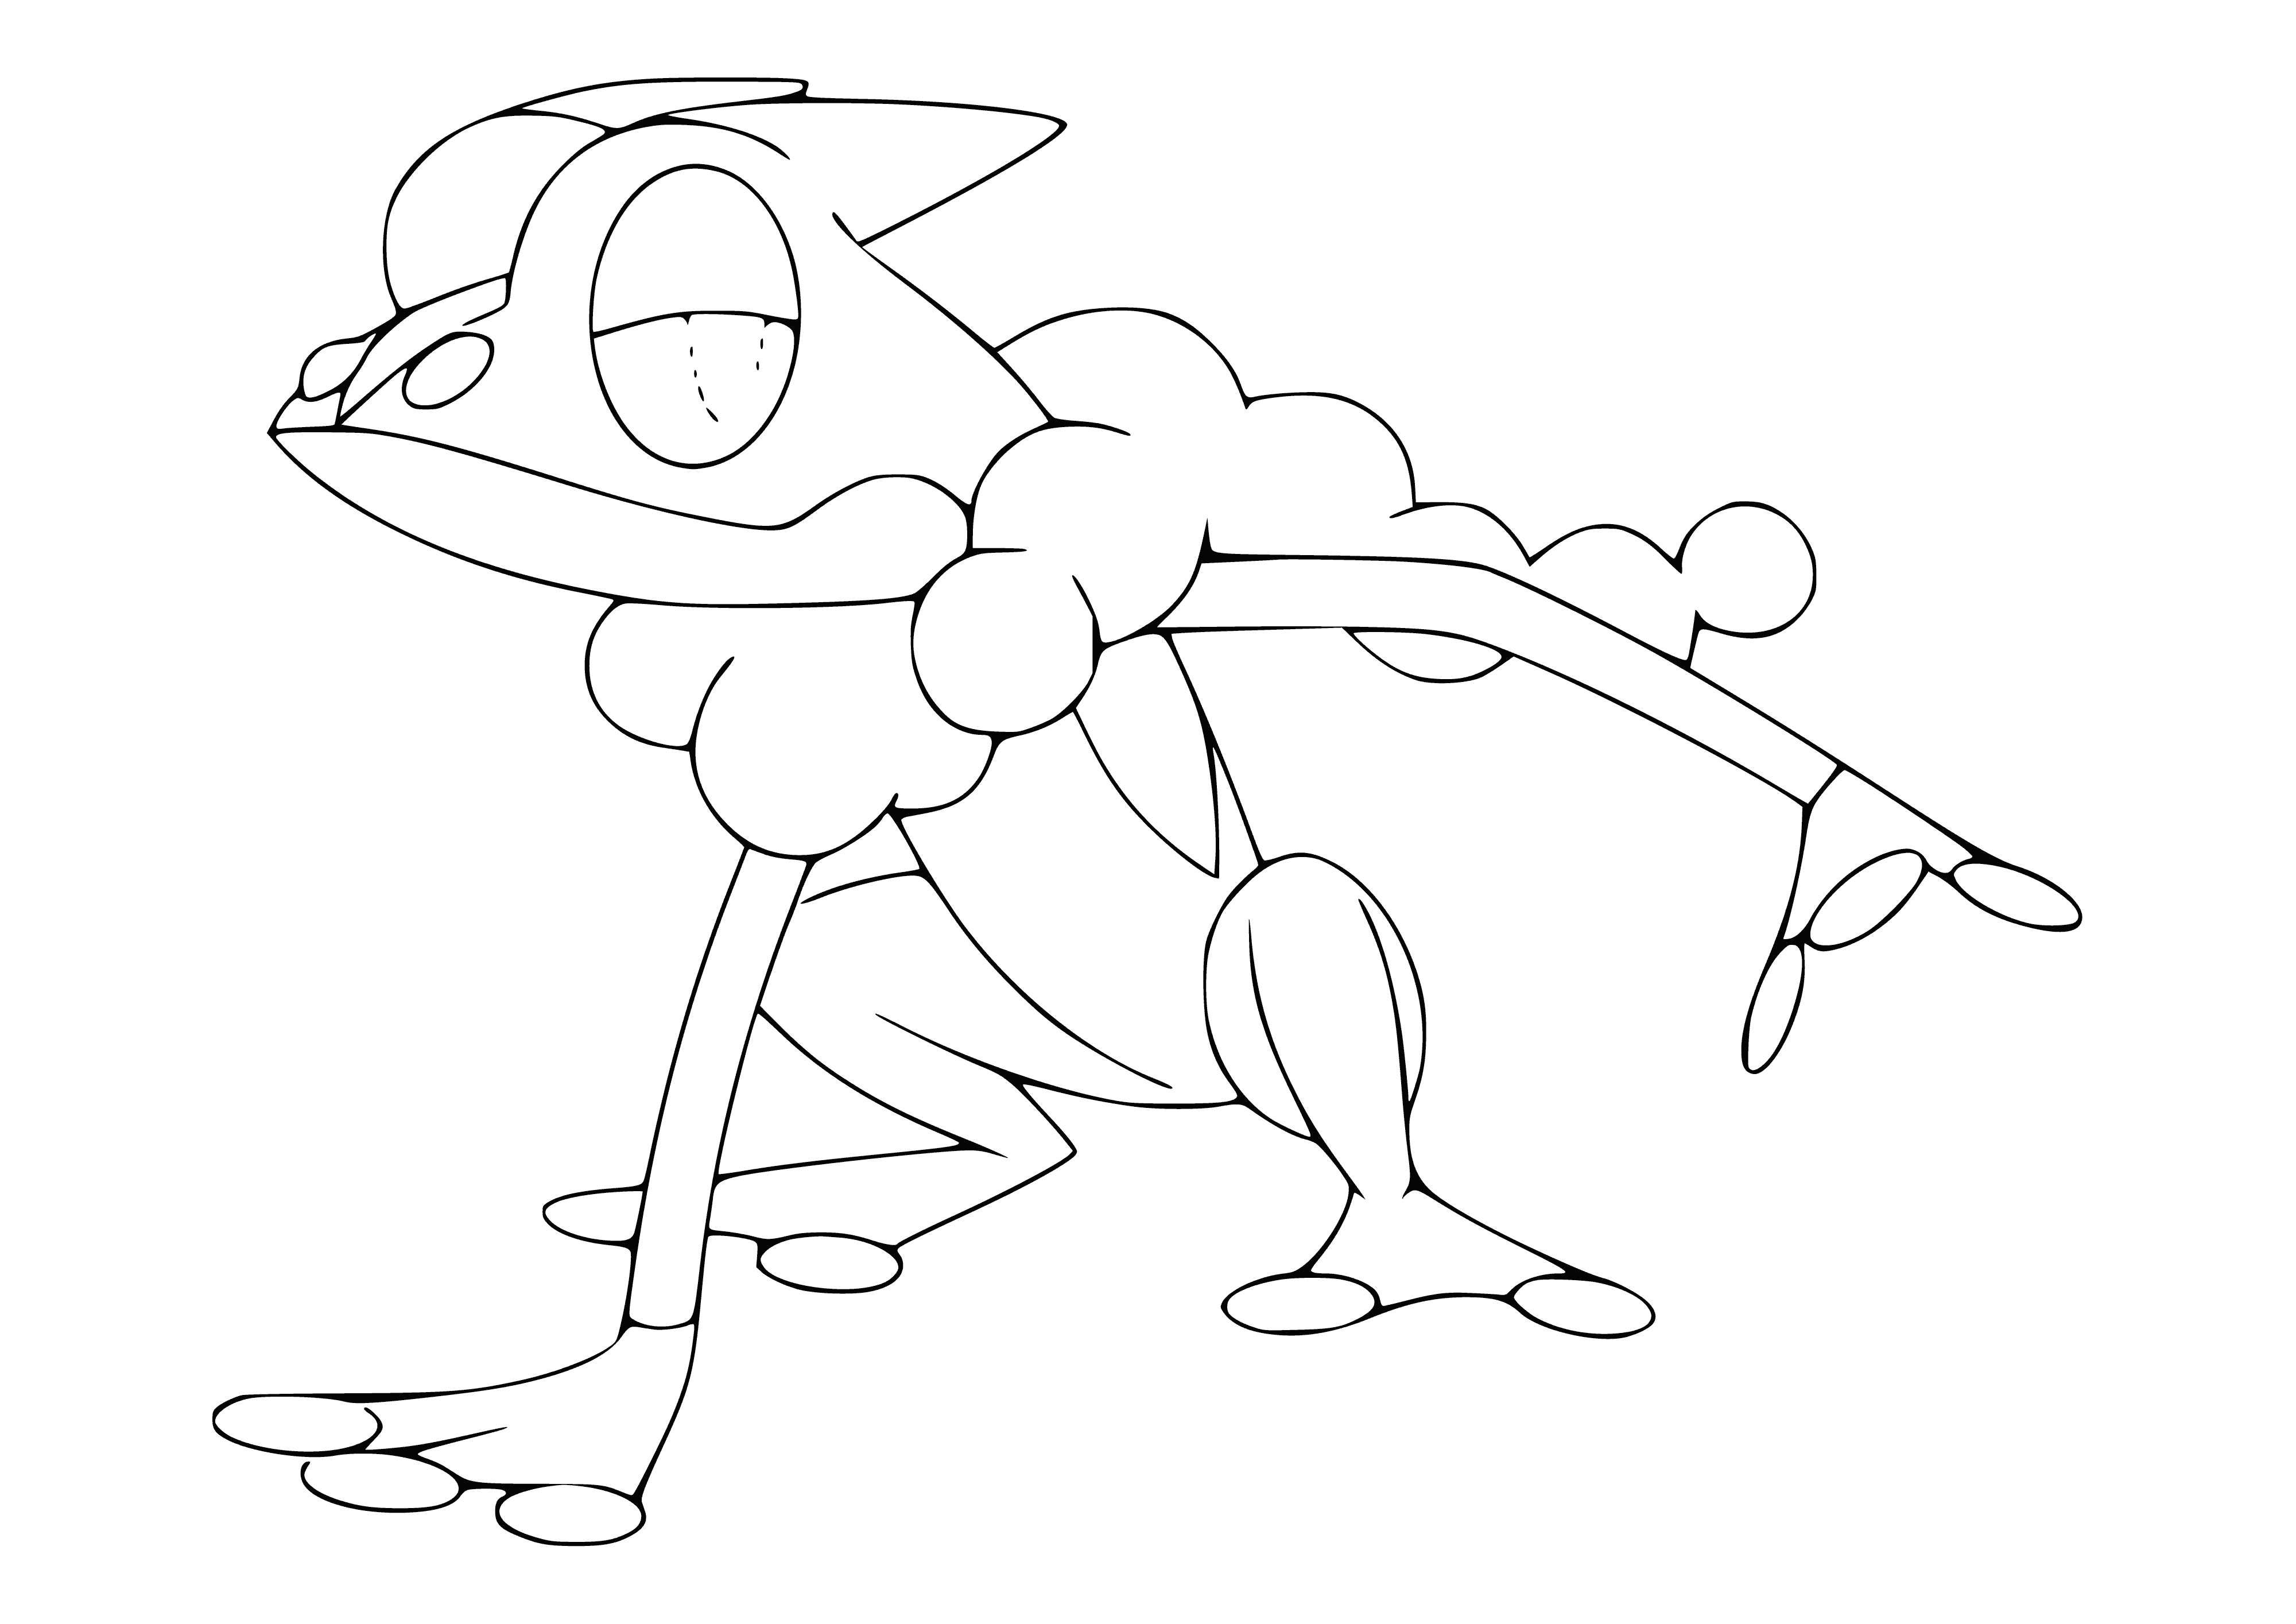 Pokemon Frogadier (Frogadier) coloring page